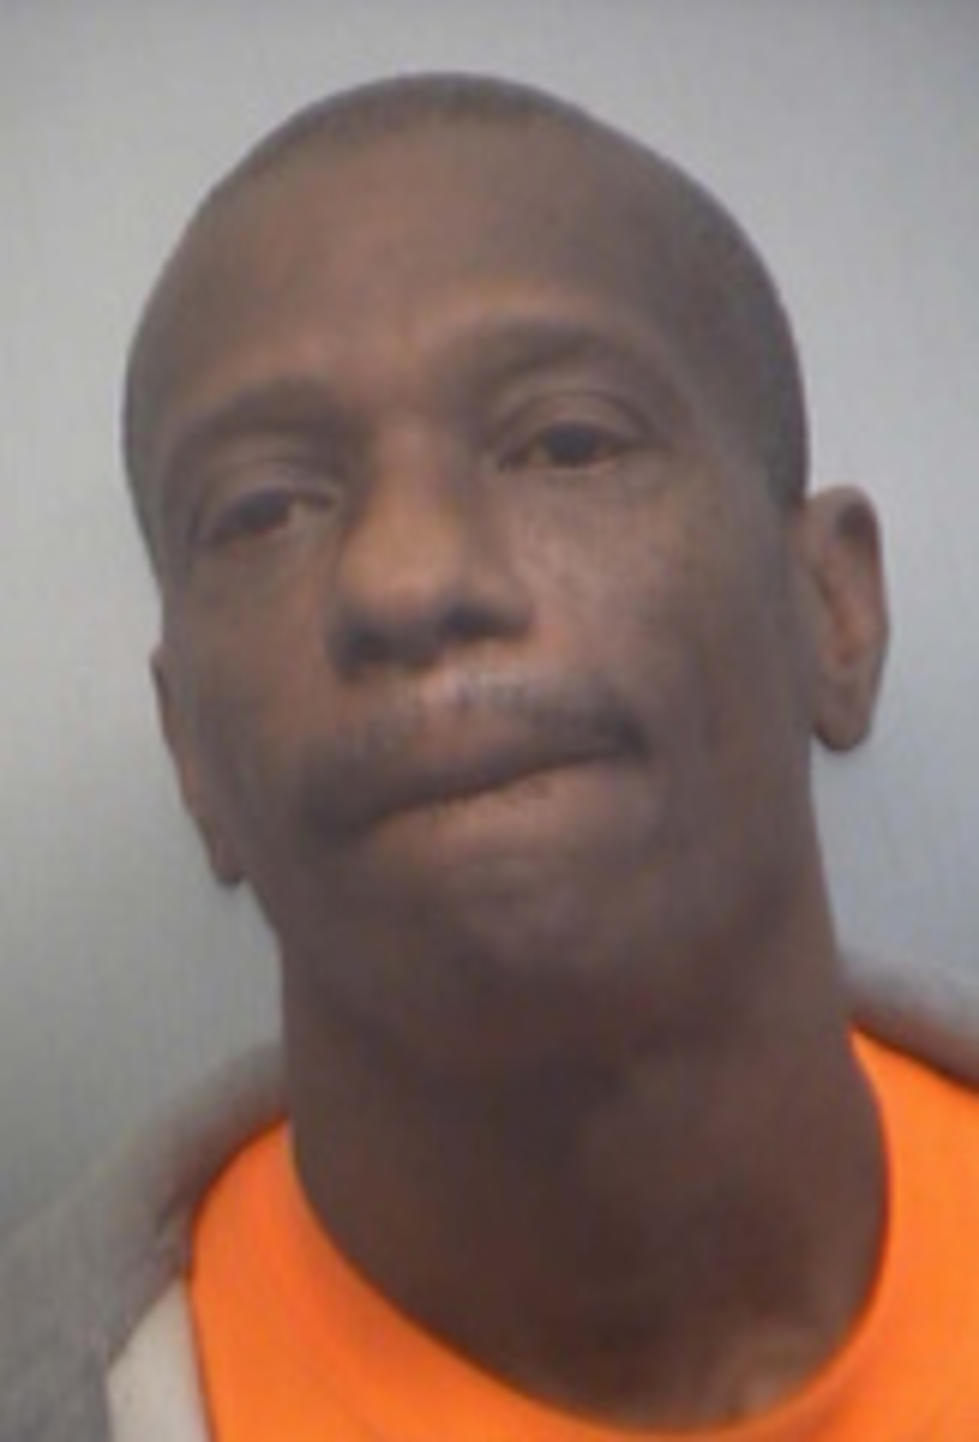 Fugitive Who&#8217;s Been On the Run Since &#8217;83 Is Busted&#8230; For Relieving Himself In Public!